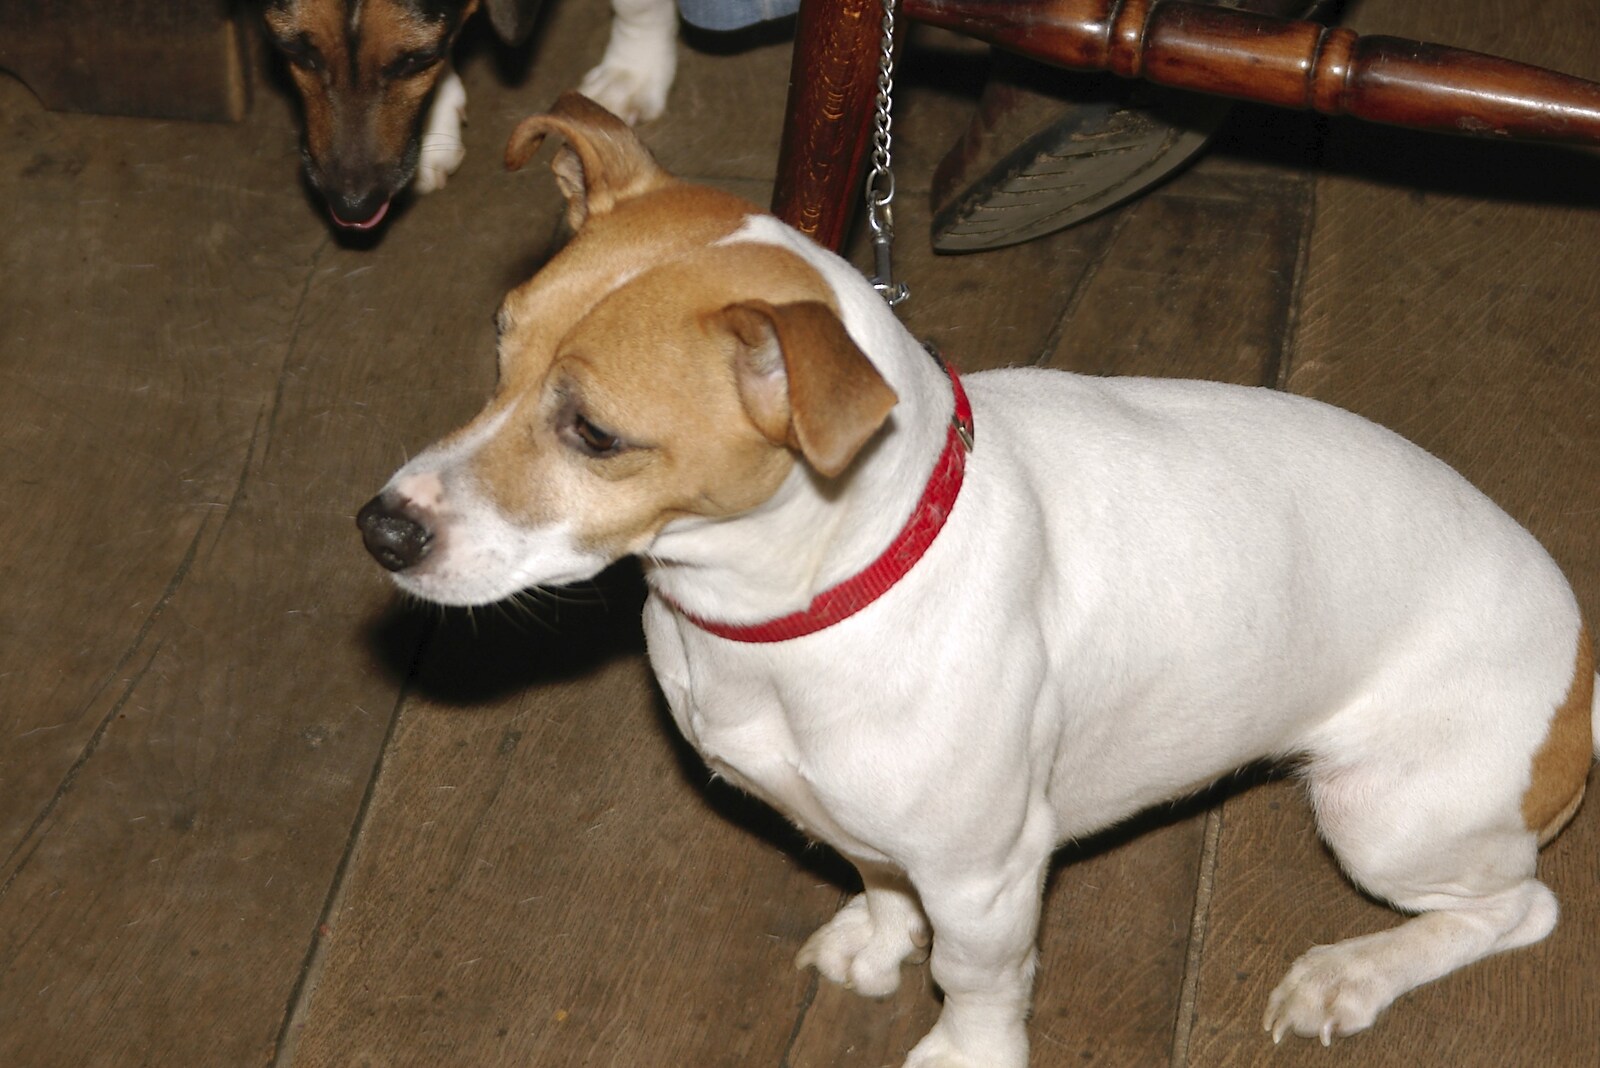 Boxing Day Rambles, Hoxne and Oakley, Suffolk - 26th December 2004: A small dog at the bar